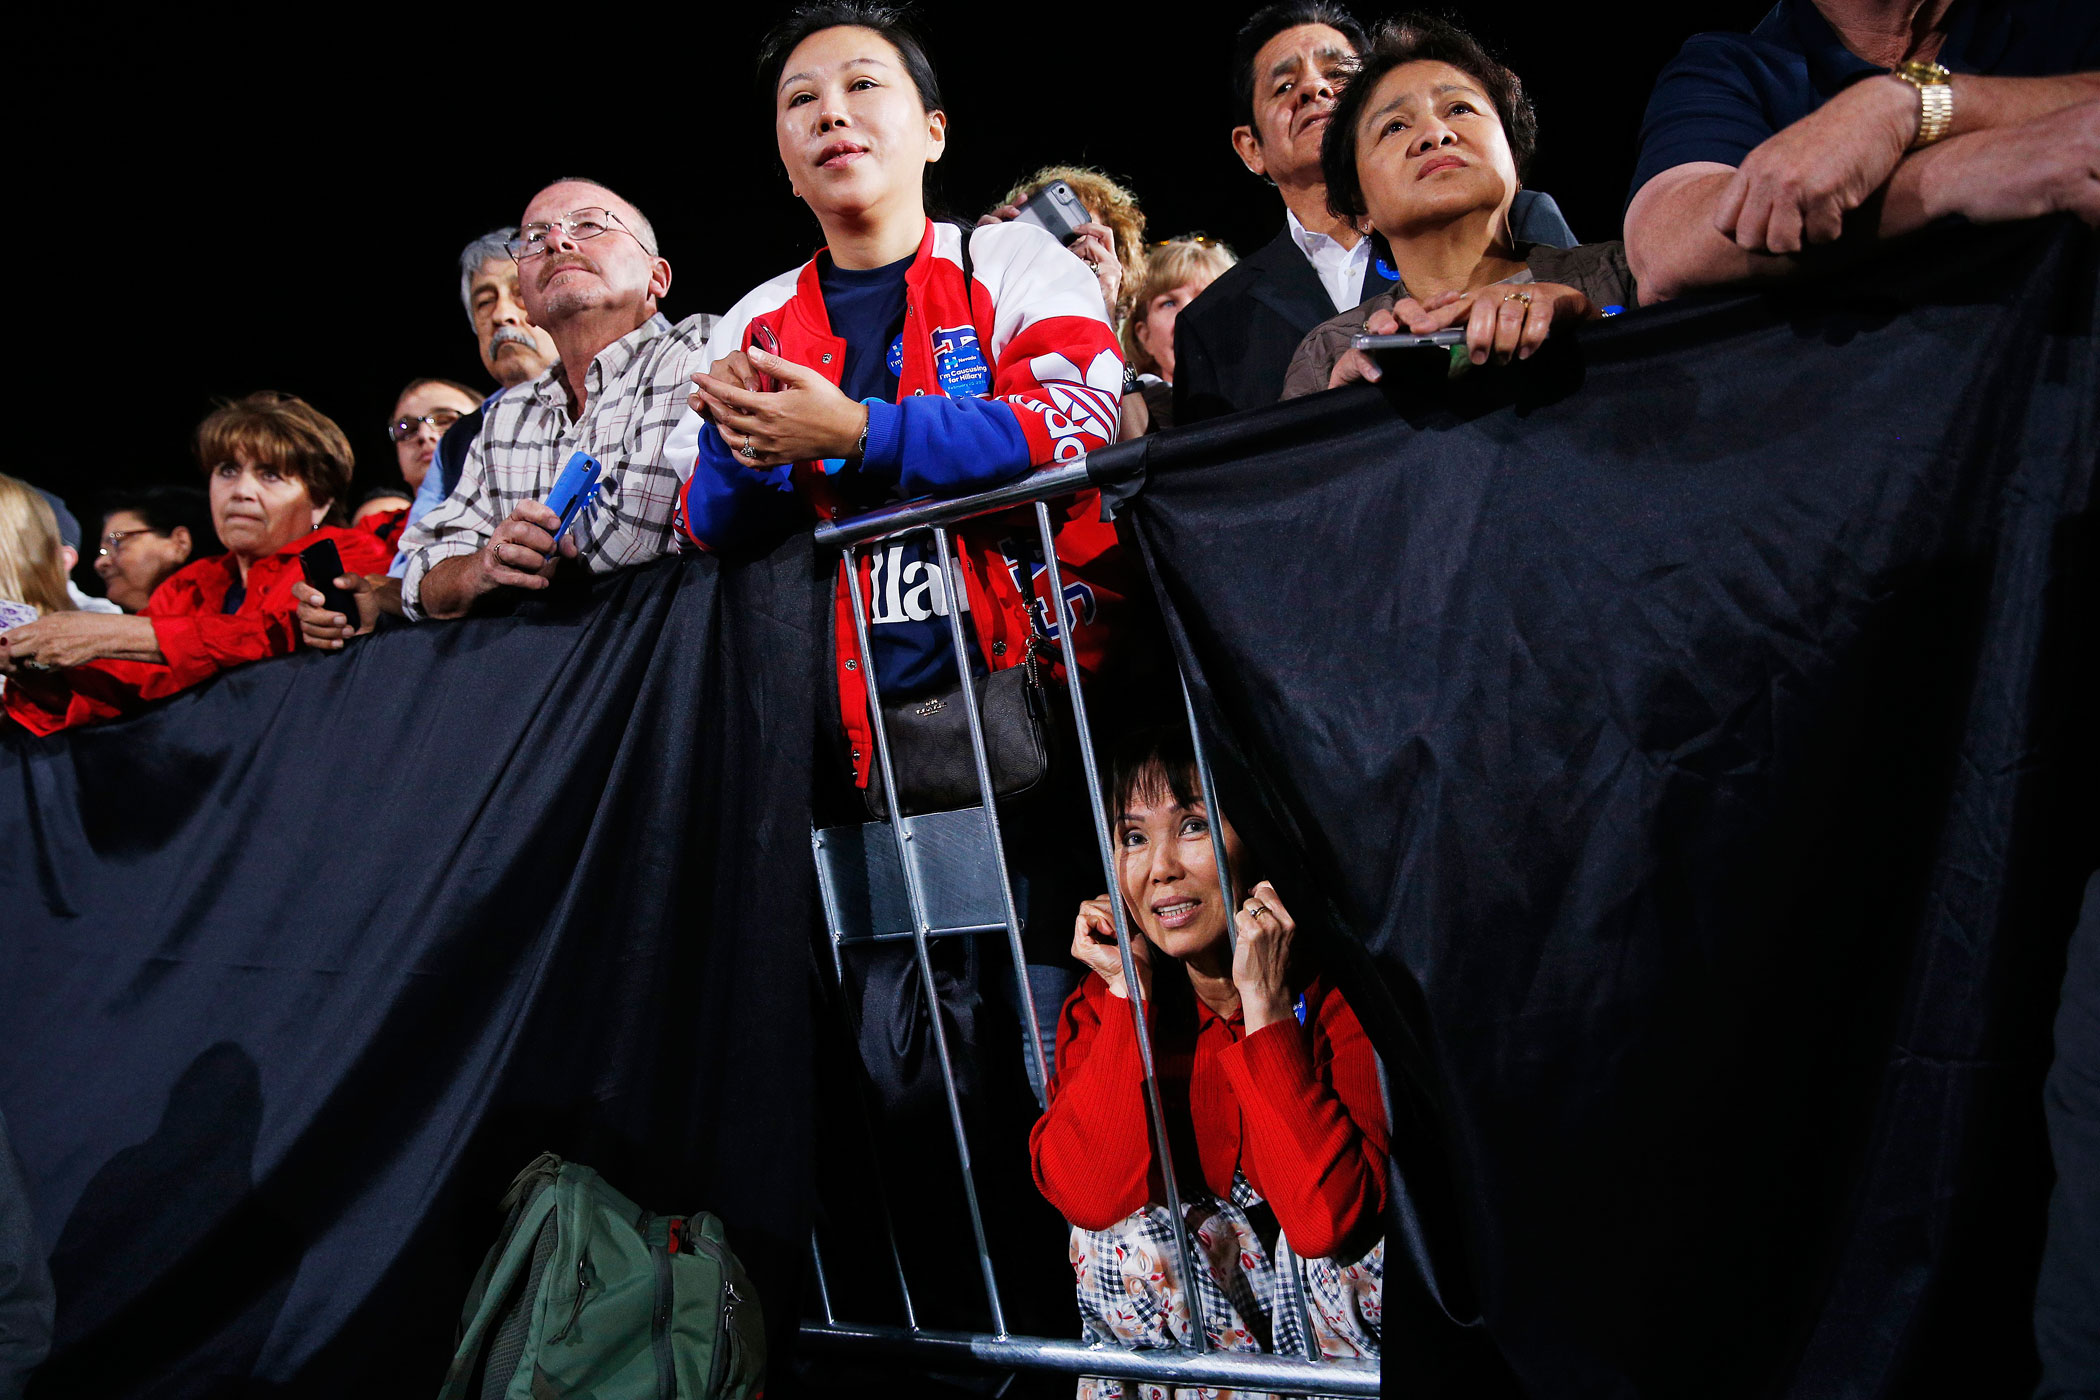 Supporters watch Hillary Clinton speak during a rally on Feb. 19, 2016, in Las Vegas.